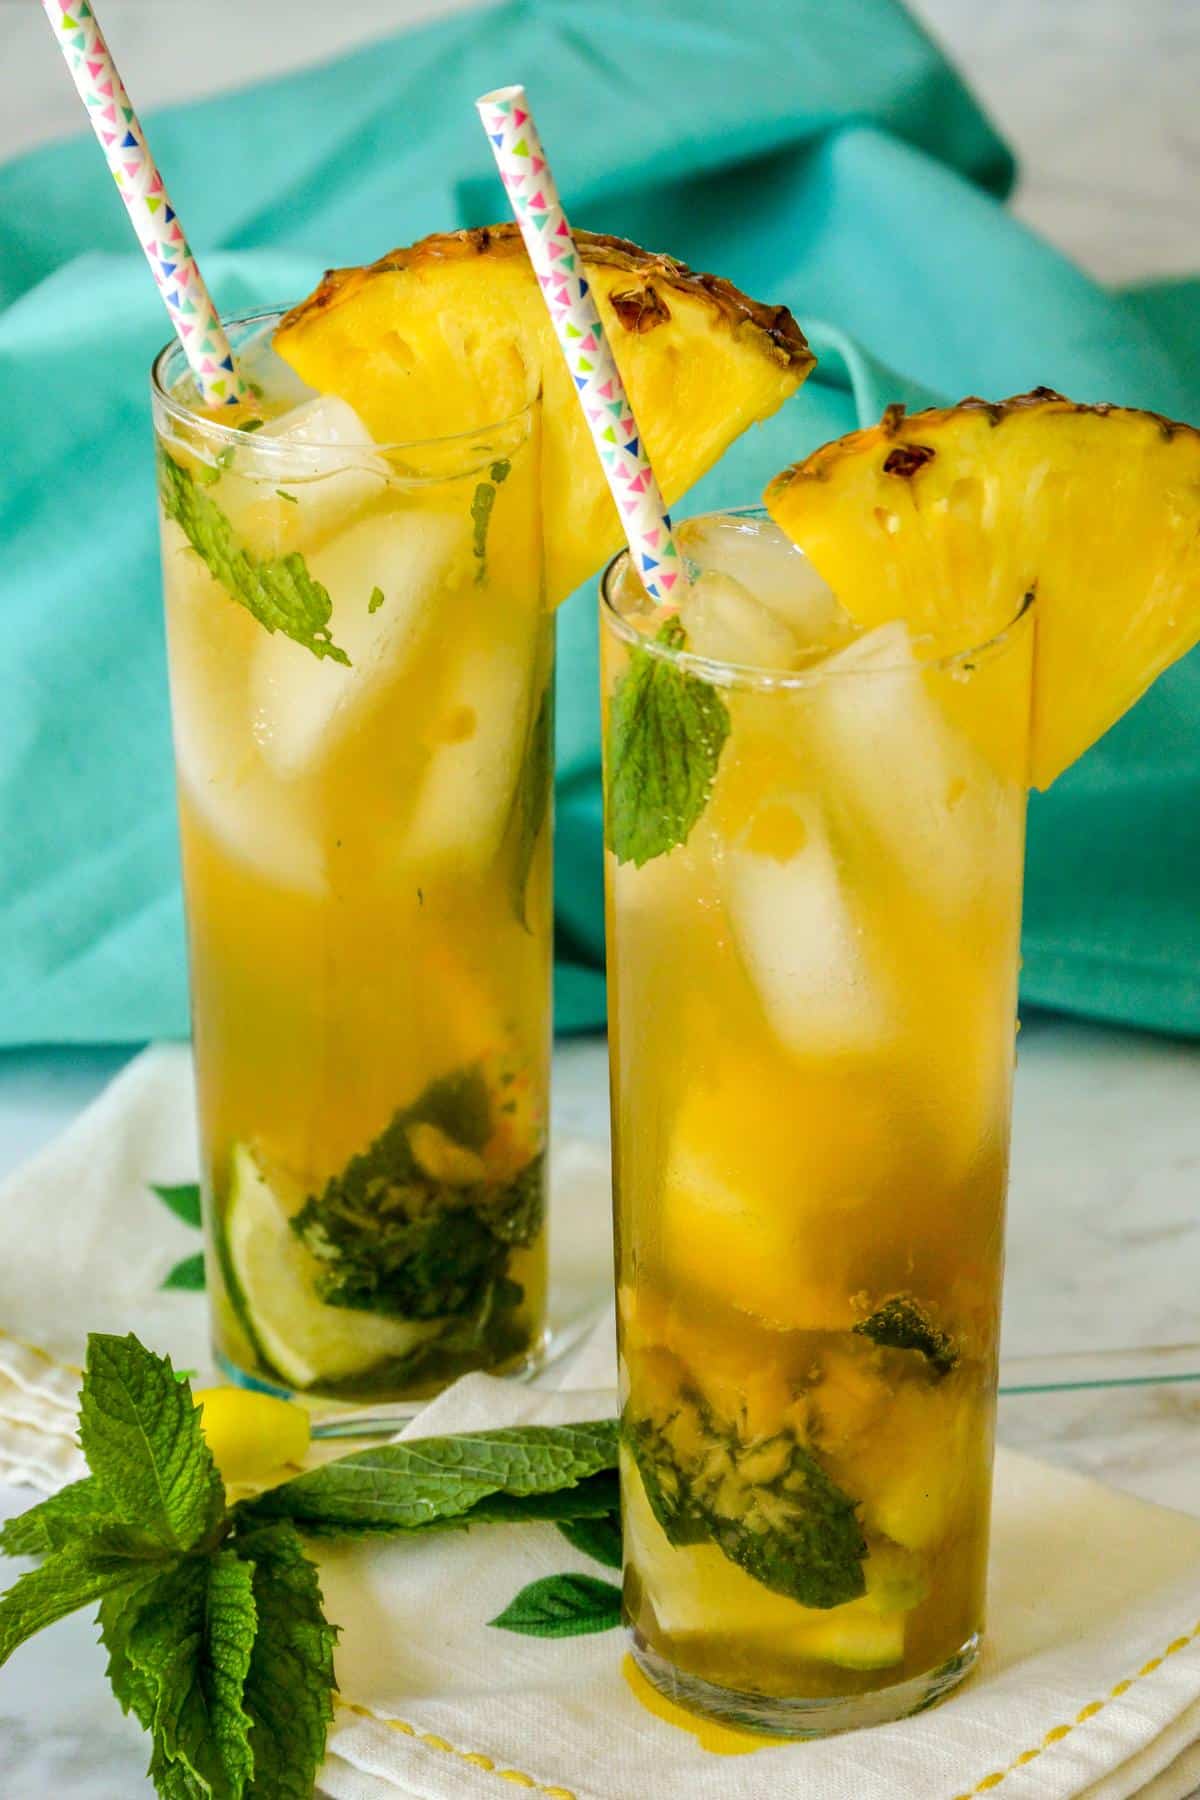 Two cocktails with pineapple wedges and fresh mint leaves.